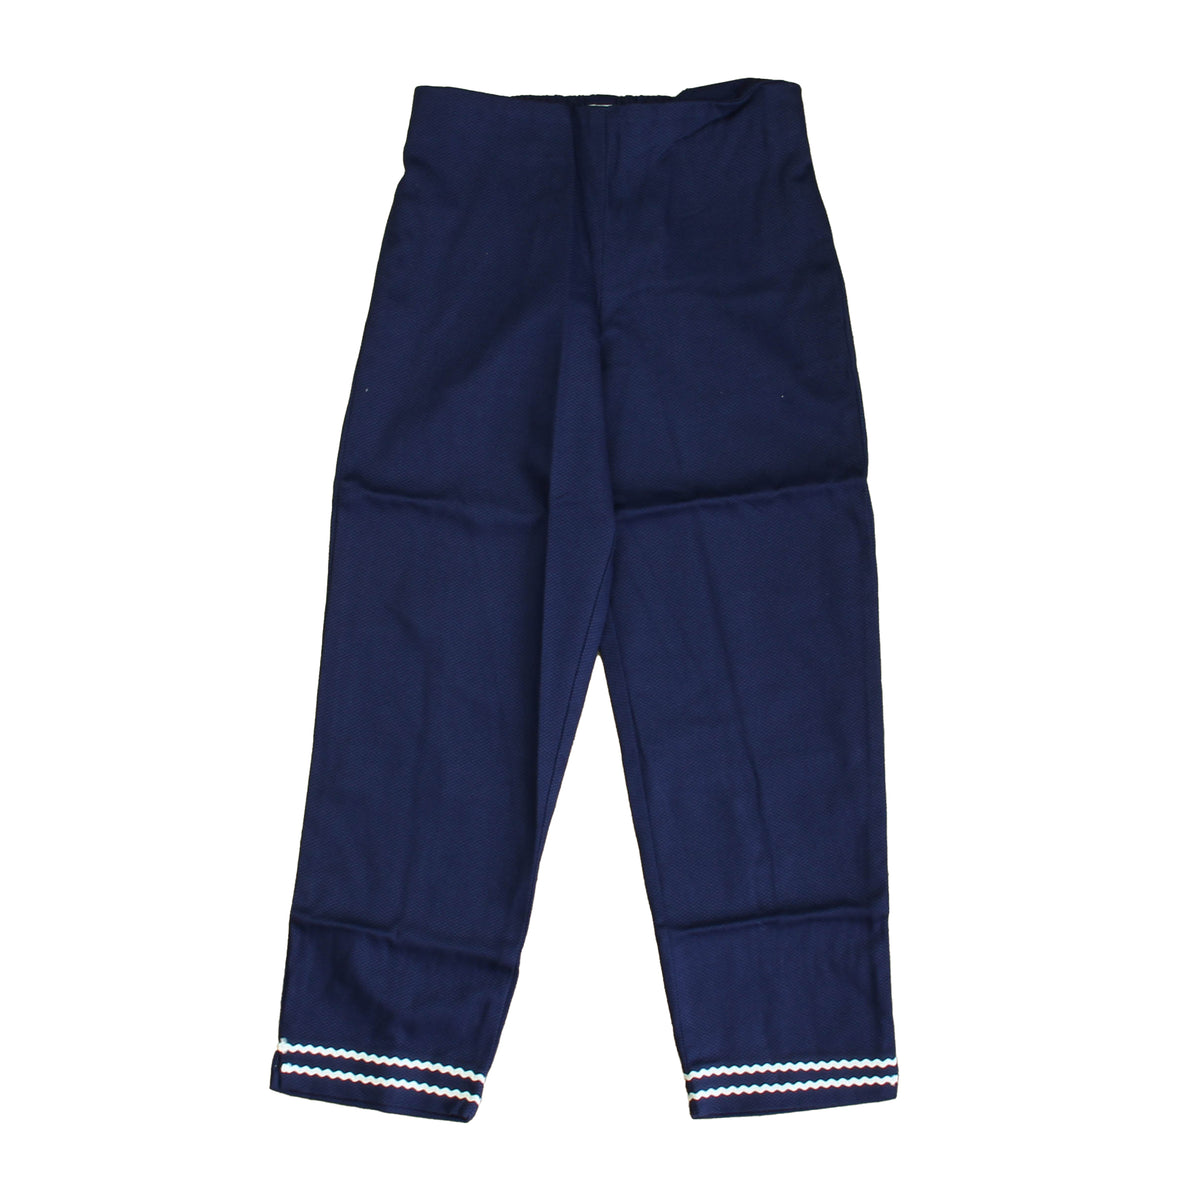 New with Tags: Navy Blue Pants -- FINAL SALE